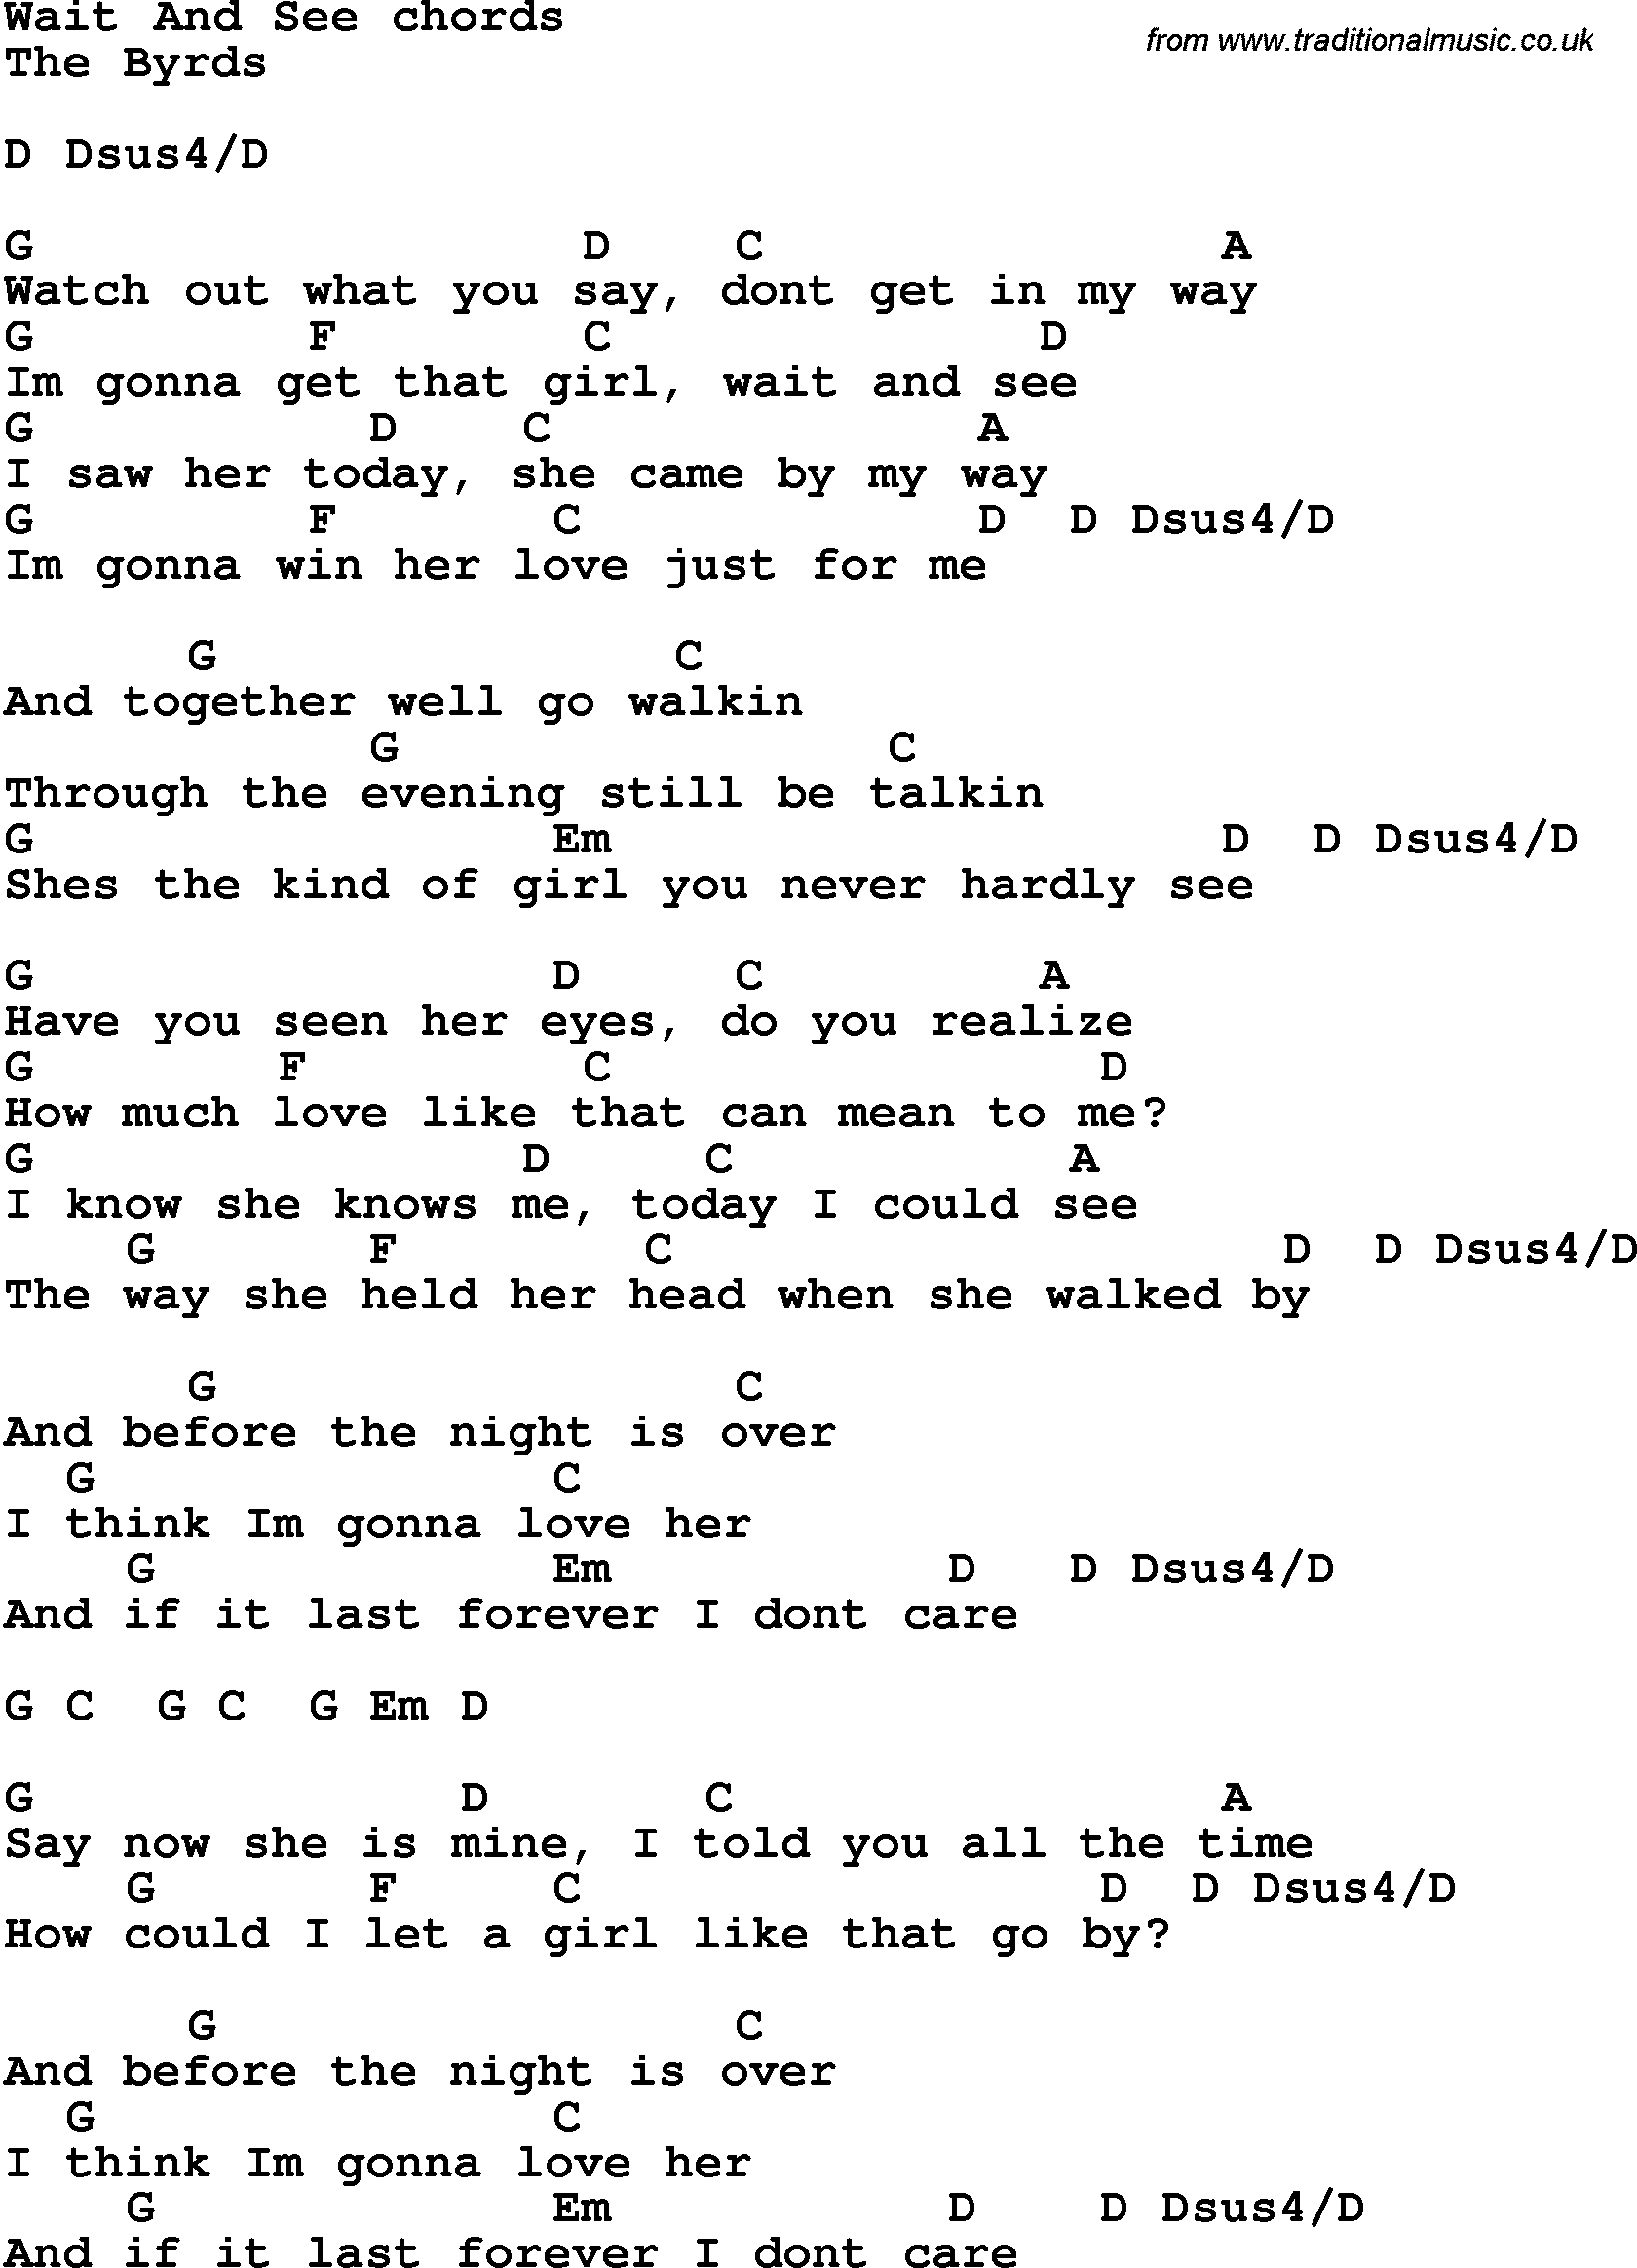 Song Lyrics with guitar chords for Wait And See